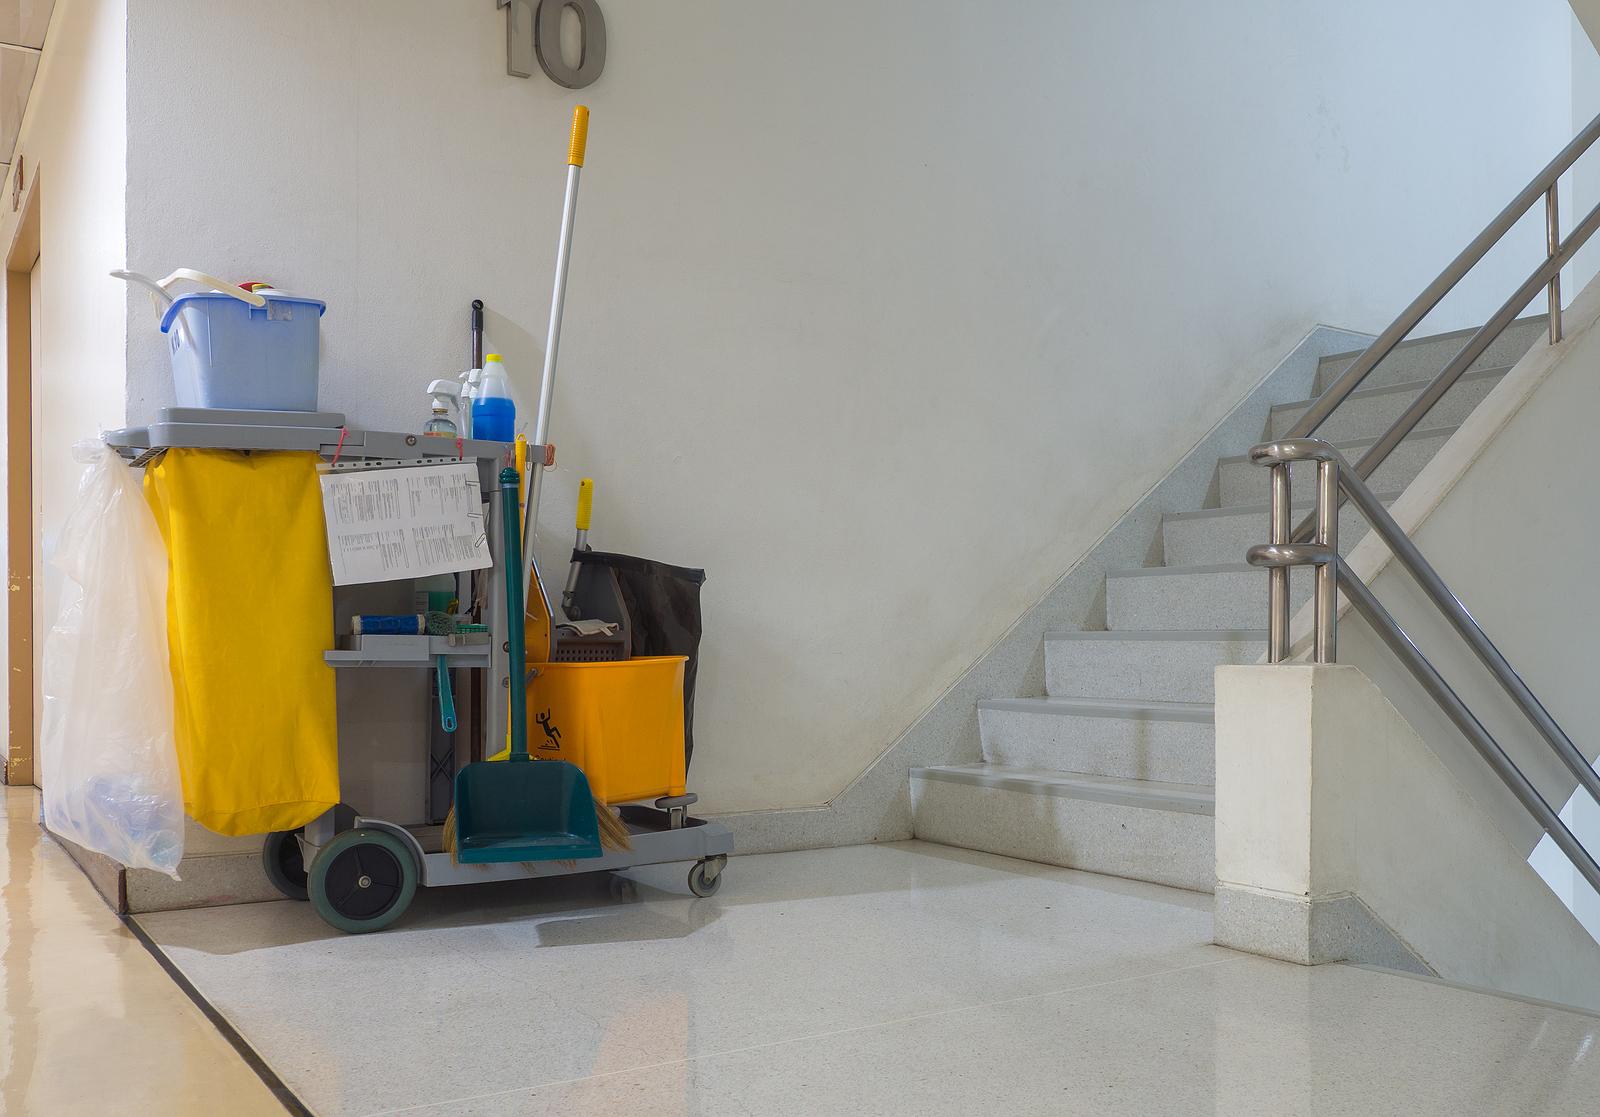 How to Hire a Janitorial Service